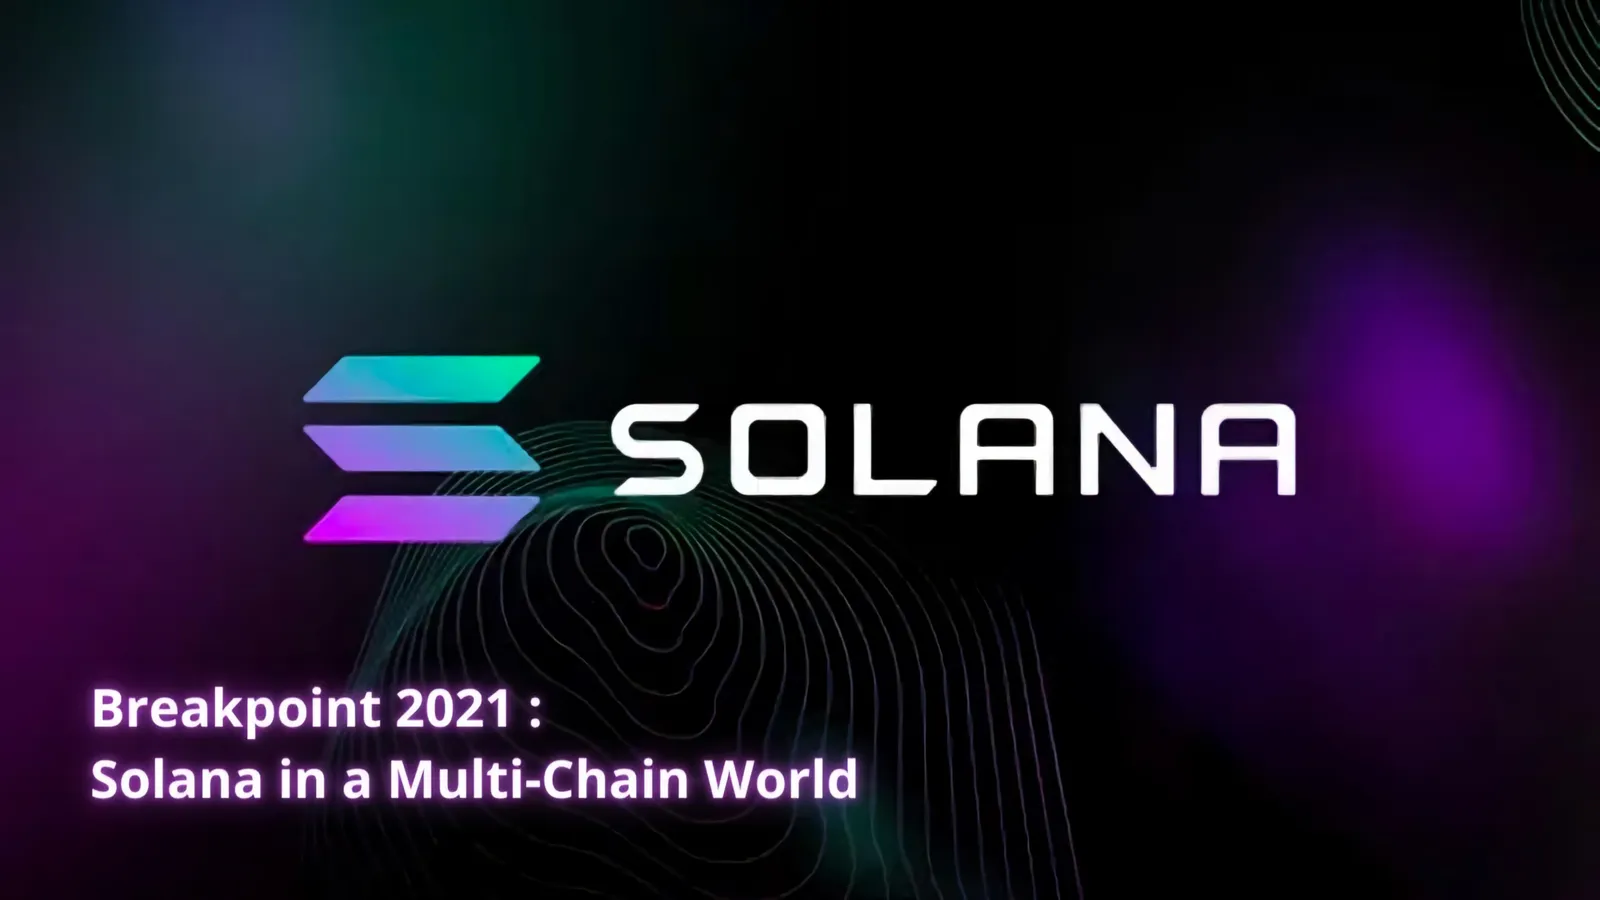 Solana in a Multi-Chain World Breakpoint 2021